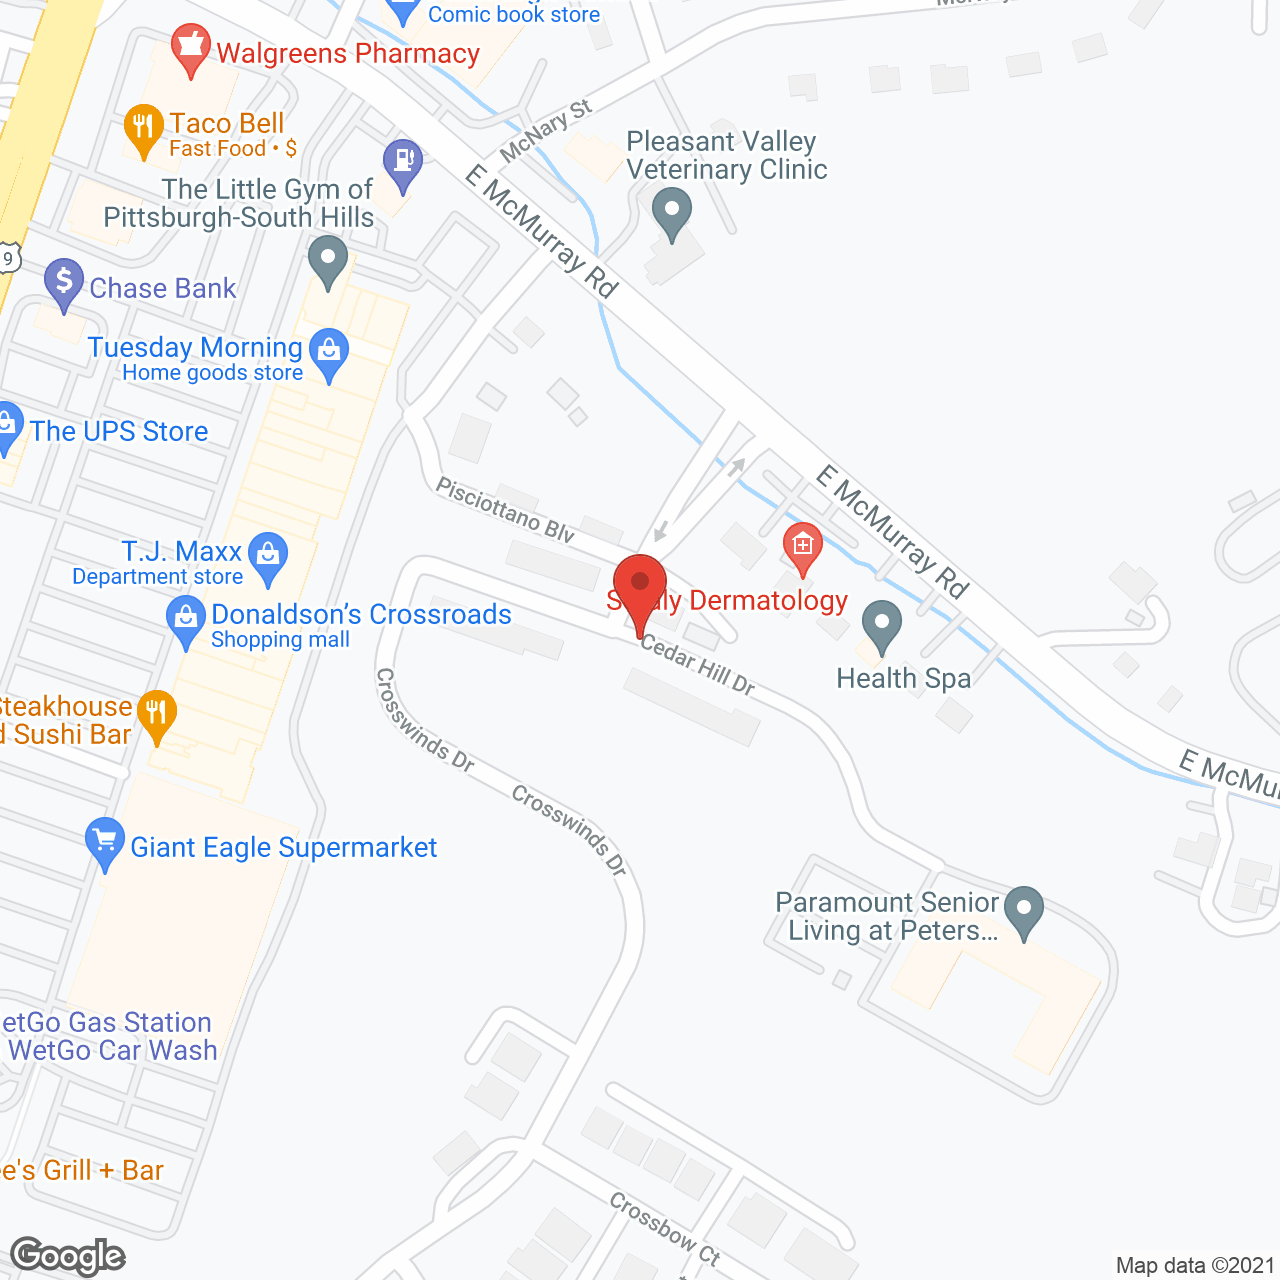 Paramount Senior Living of Peters Township in google map